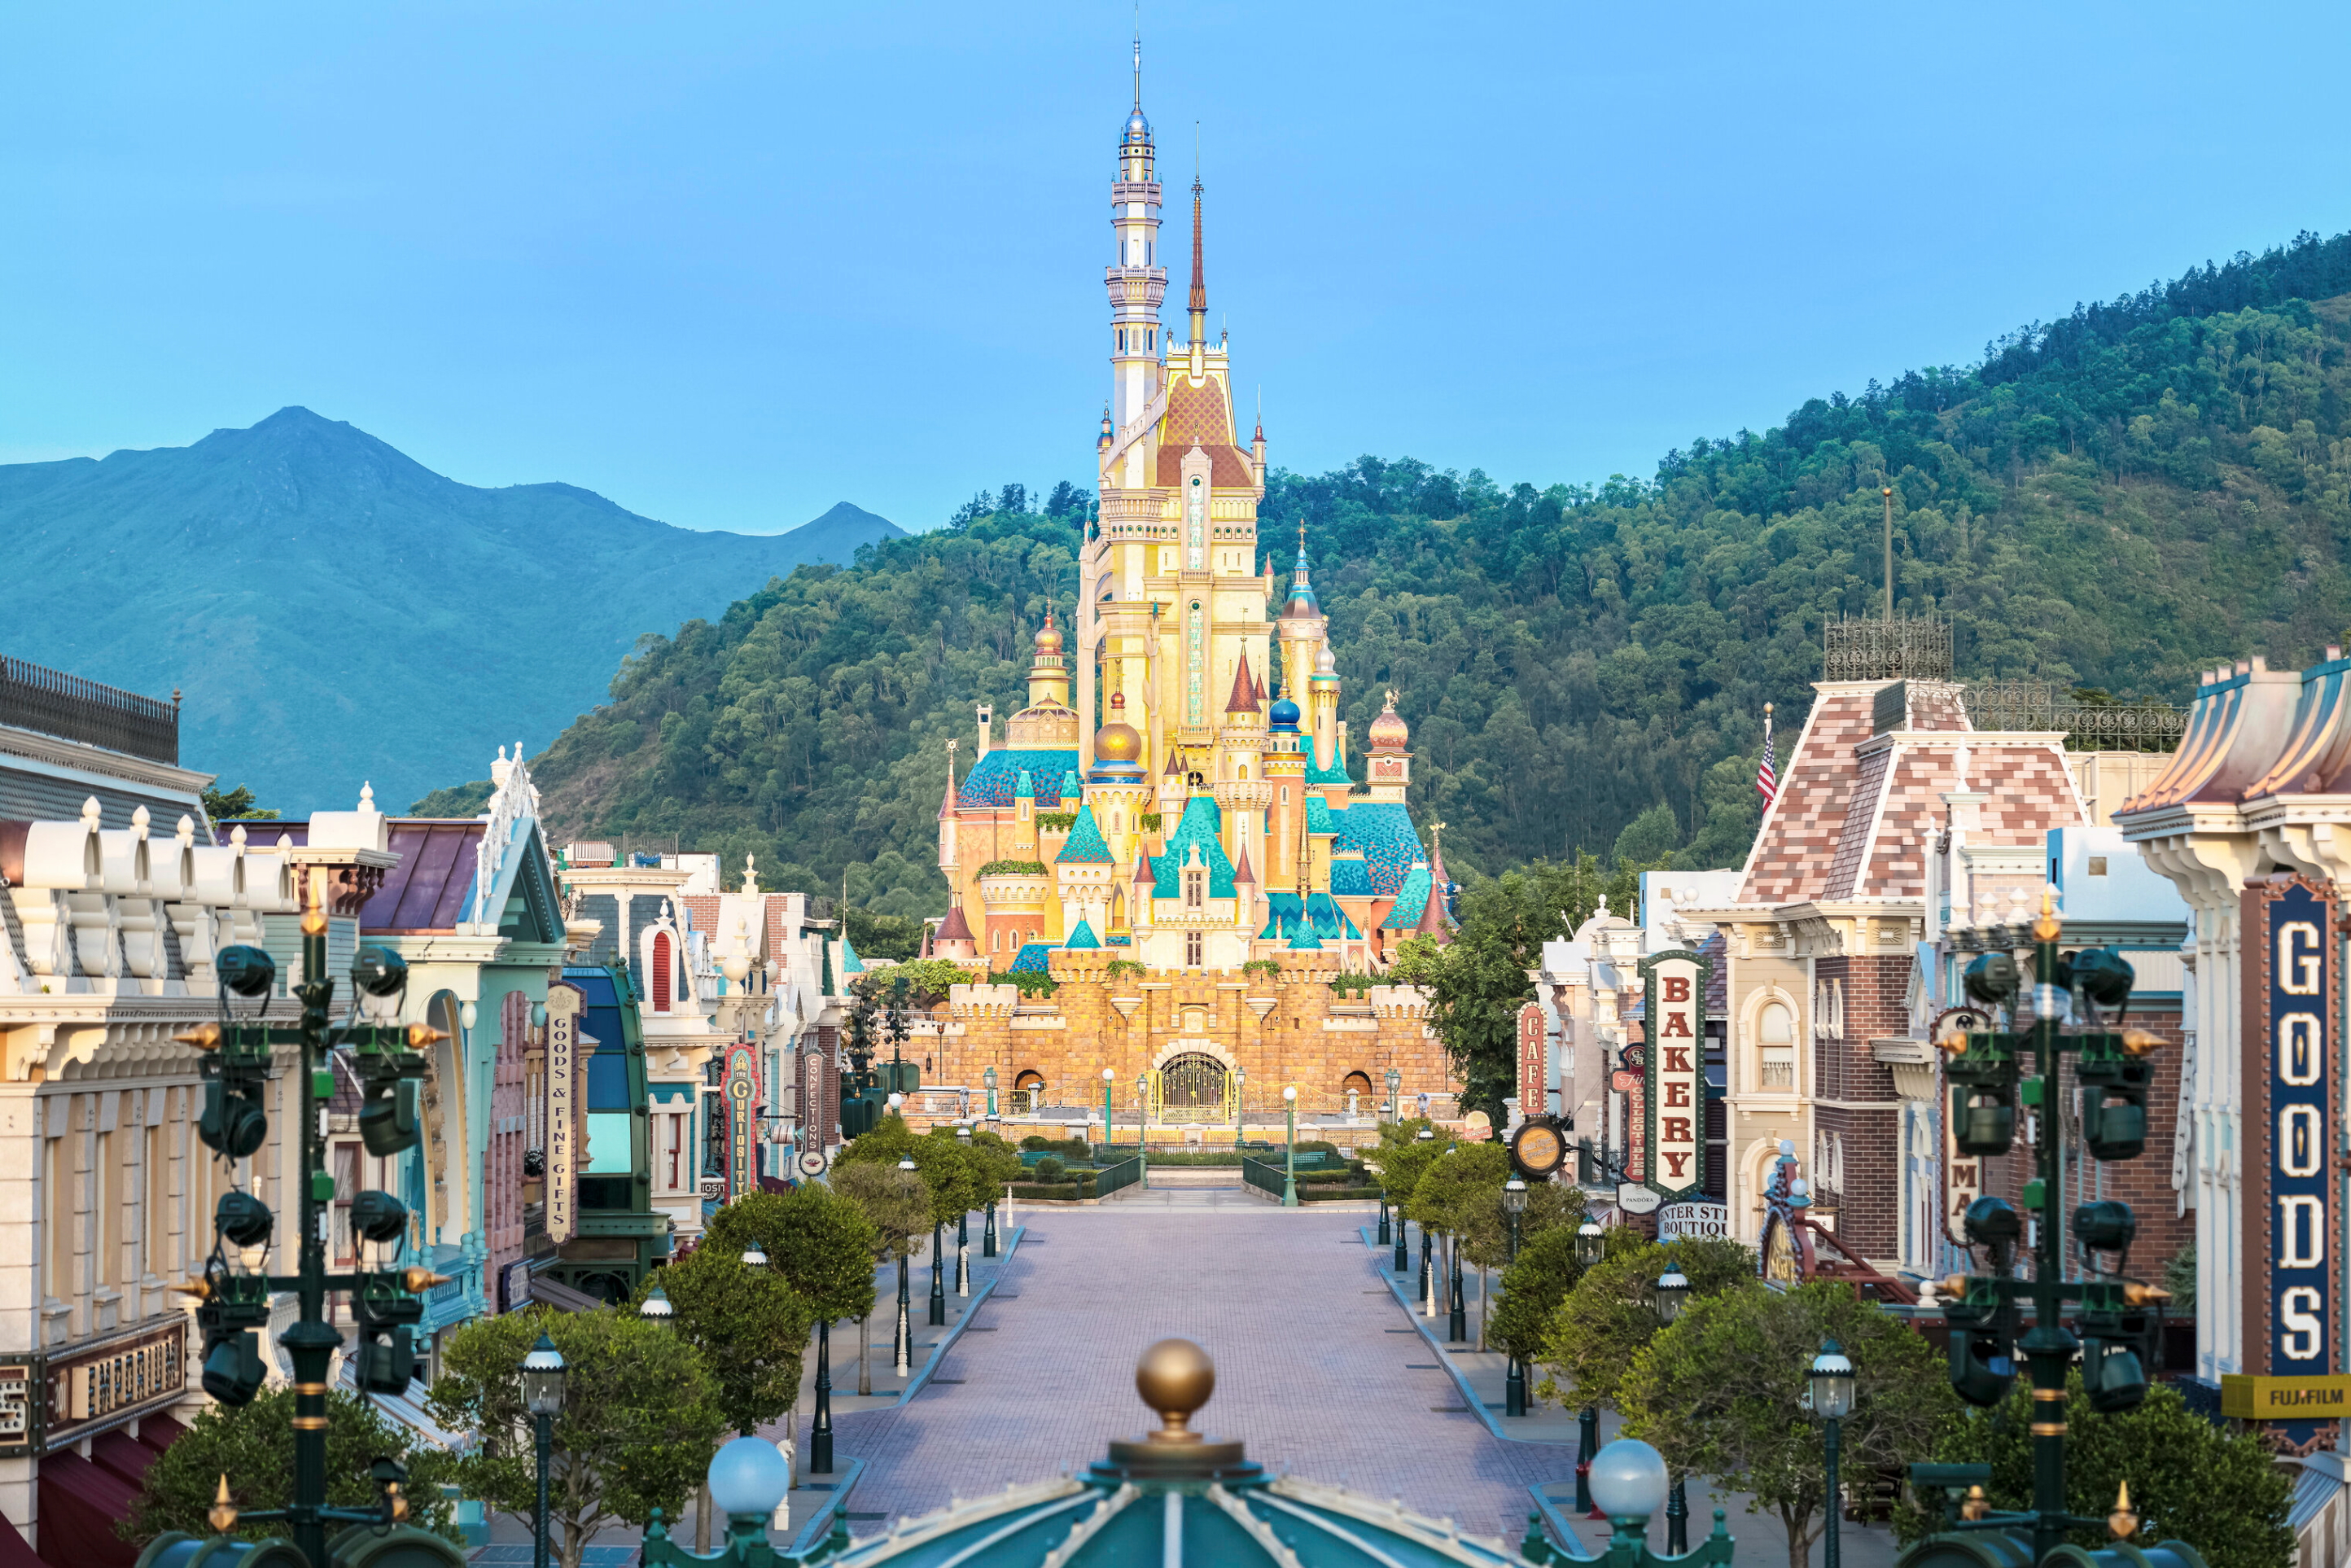 Hong Kong Disneyland Resort will officially celebrate its 15th anniversary with the opening of the reimagined castle – the Castle of Magical Dreams - on 21 November. Click to enlarge.